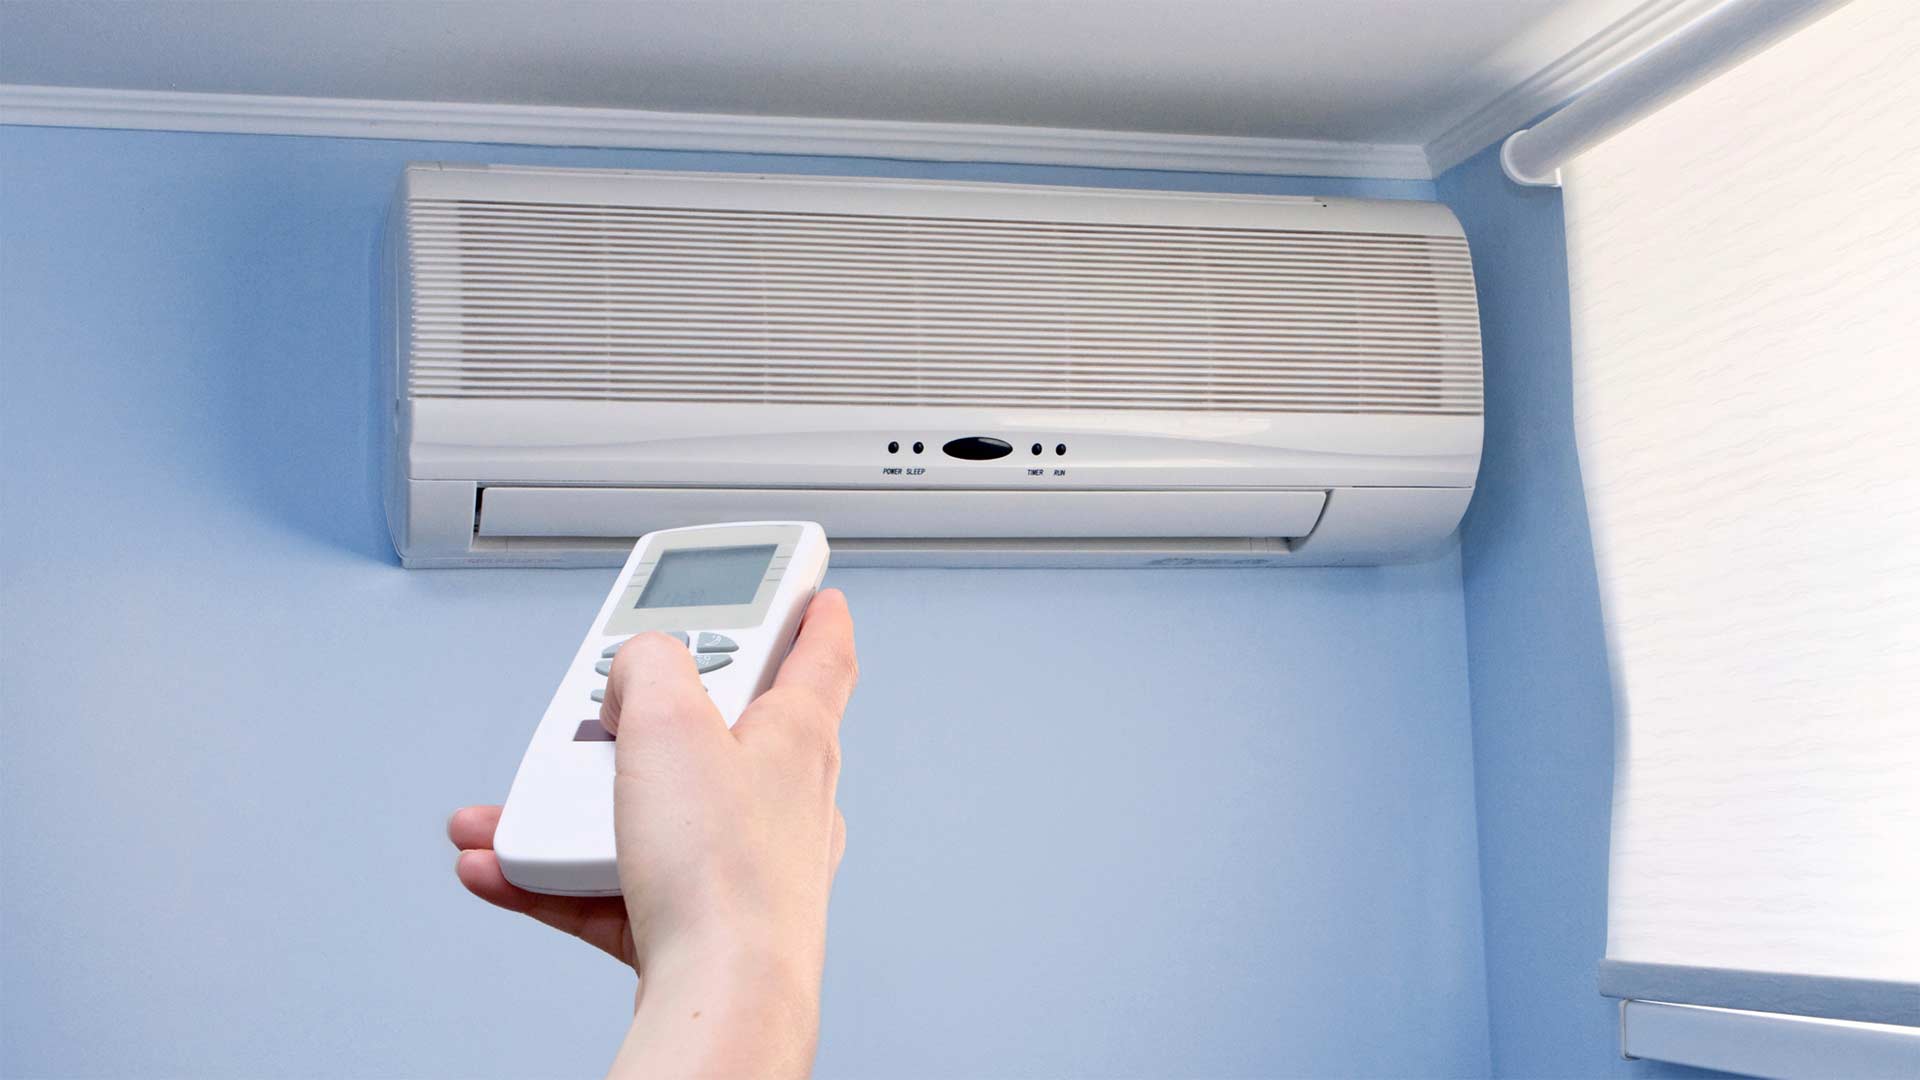 Person aiming remote control toward ductless mini-split air conditioner installed on a wall just below the ceiling.